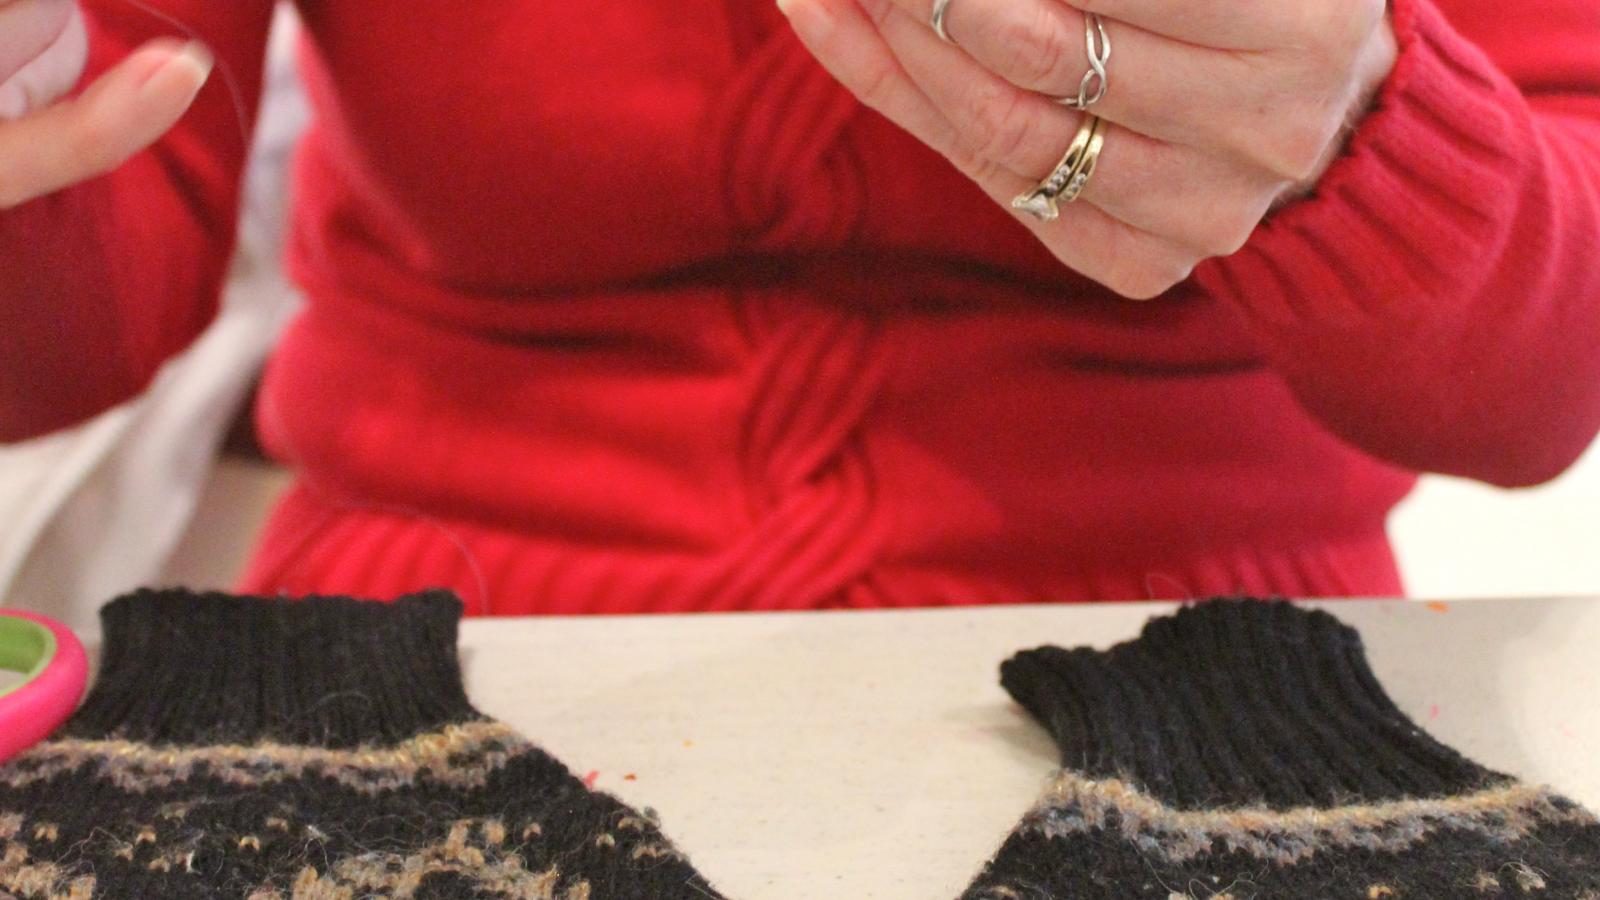 A person holds a piece of string in their hands. On the table beneath them is a pair of mittens